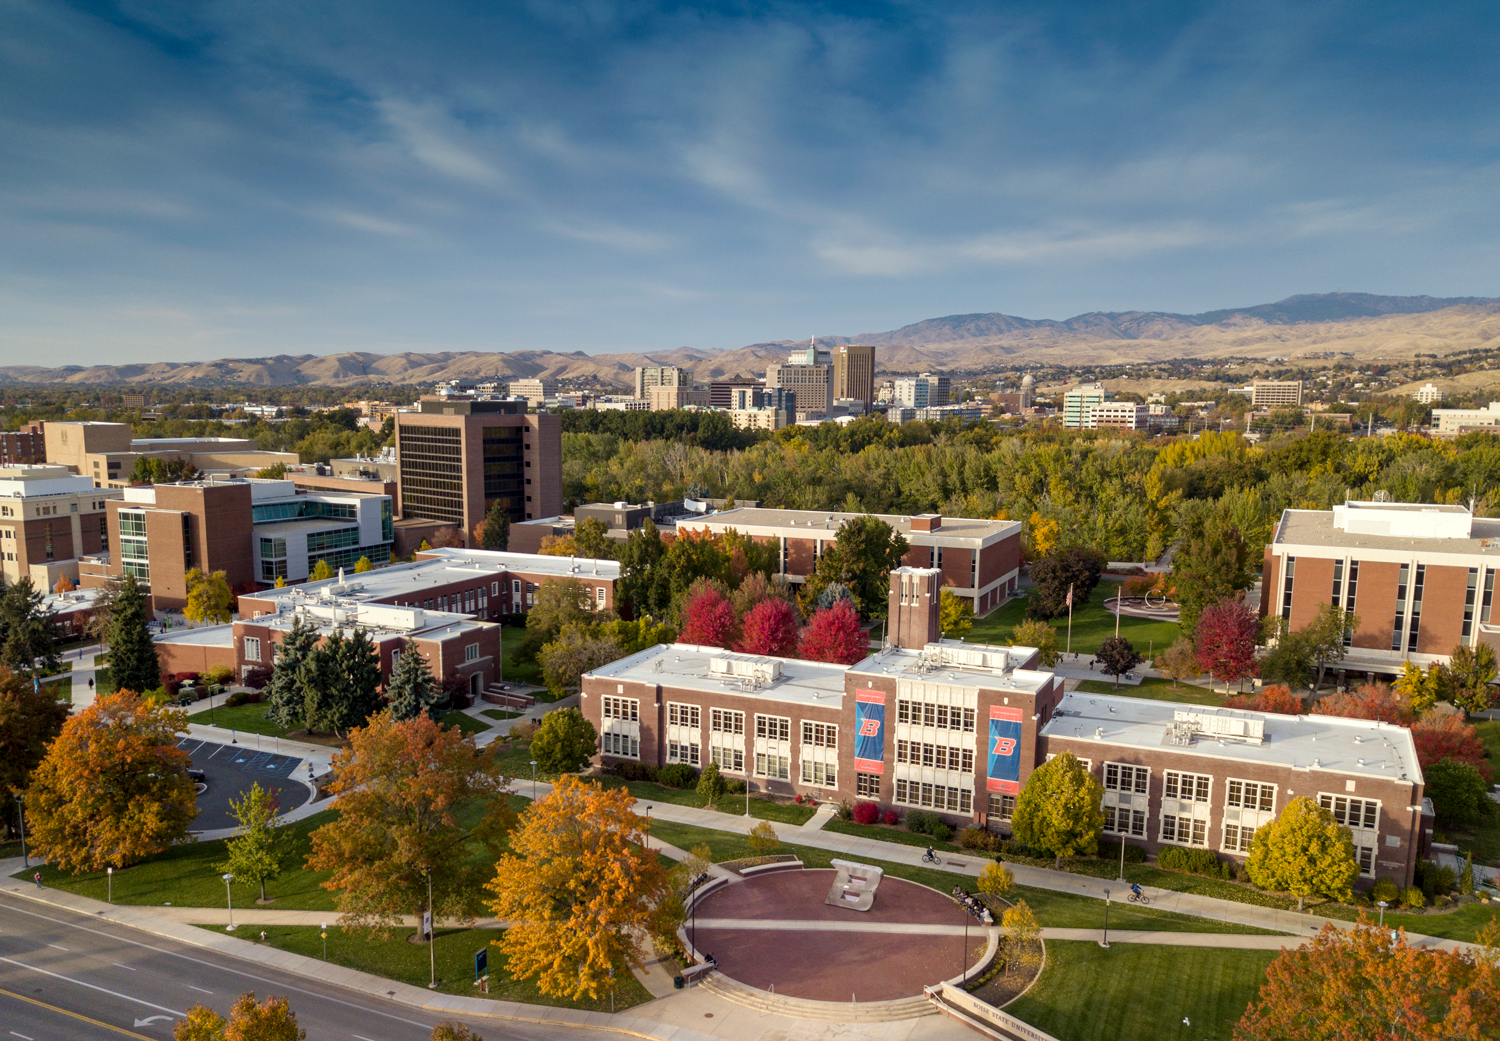 Arial view of Boise State University's campus